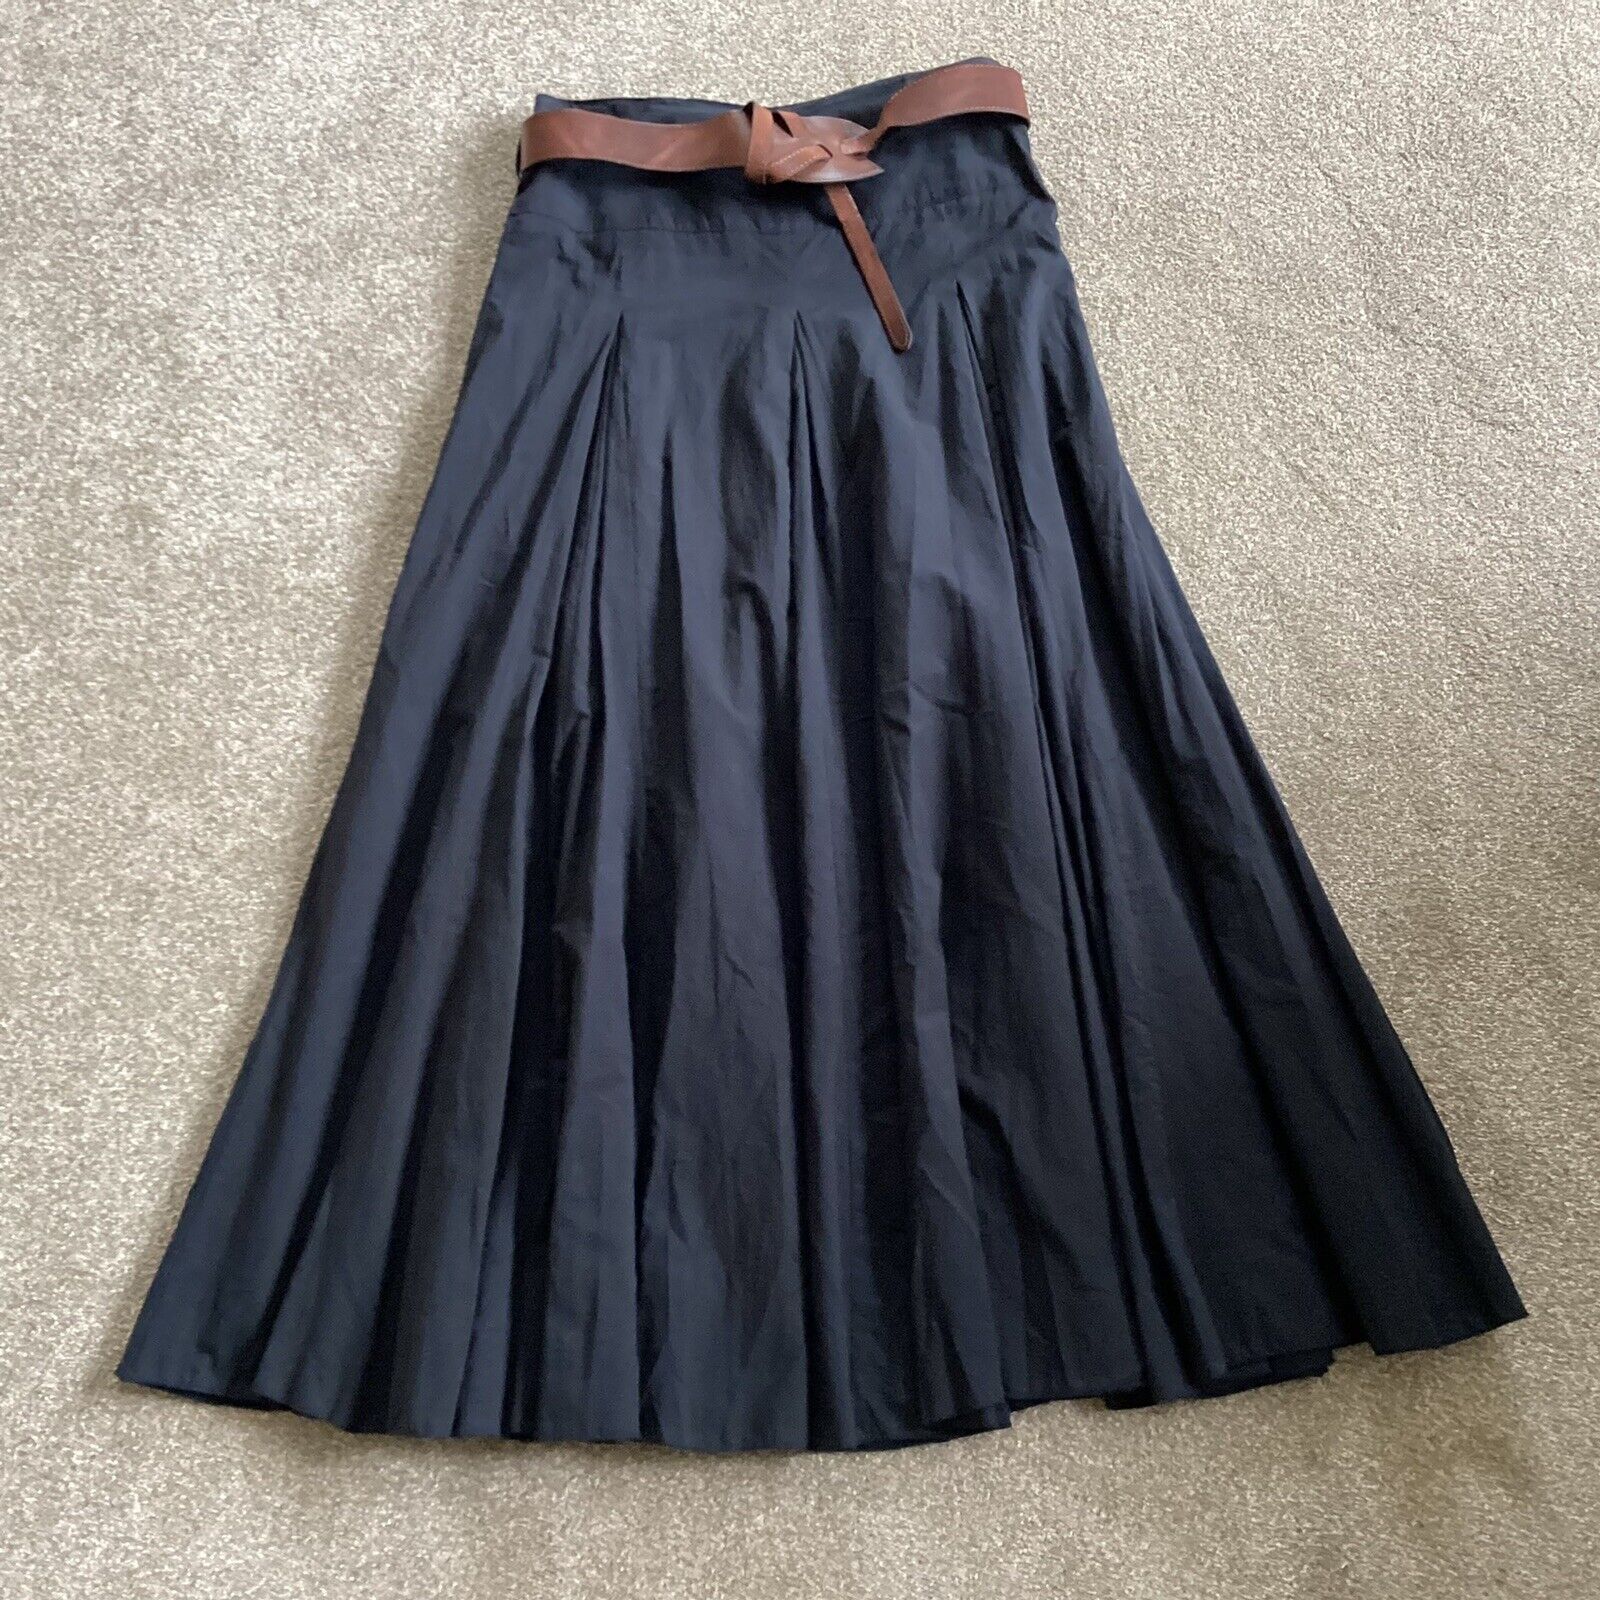 Next Black Sale Cotton Maxi Skirt 8 Full Belt Size With Omaha Mall